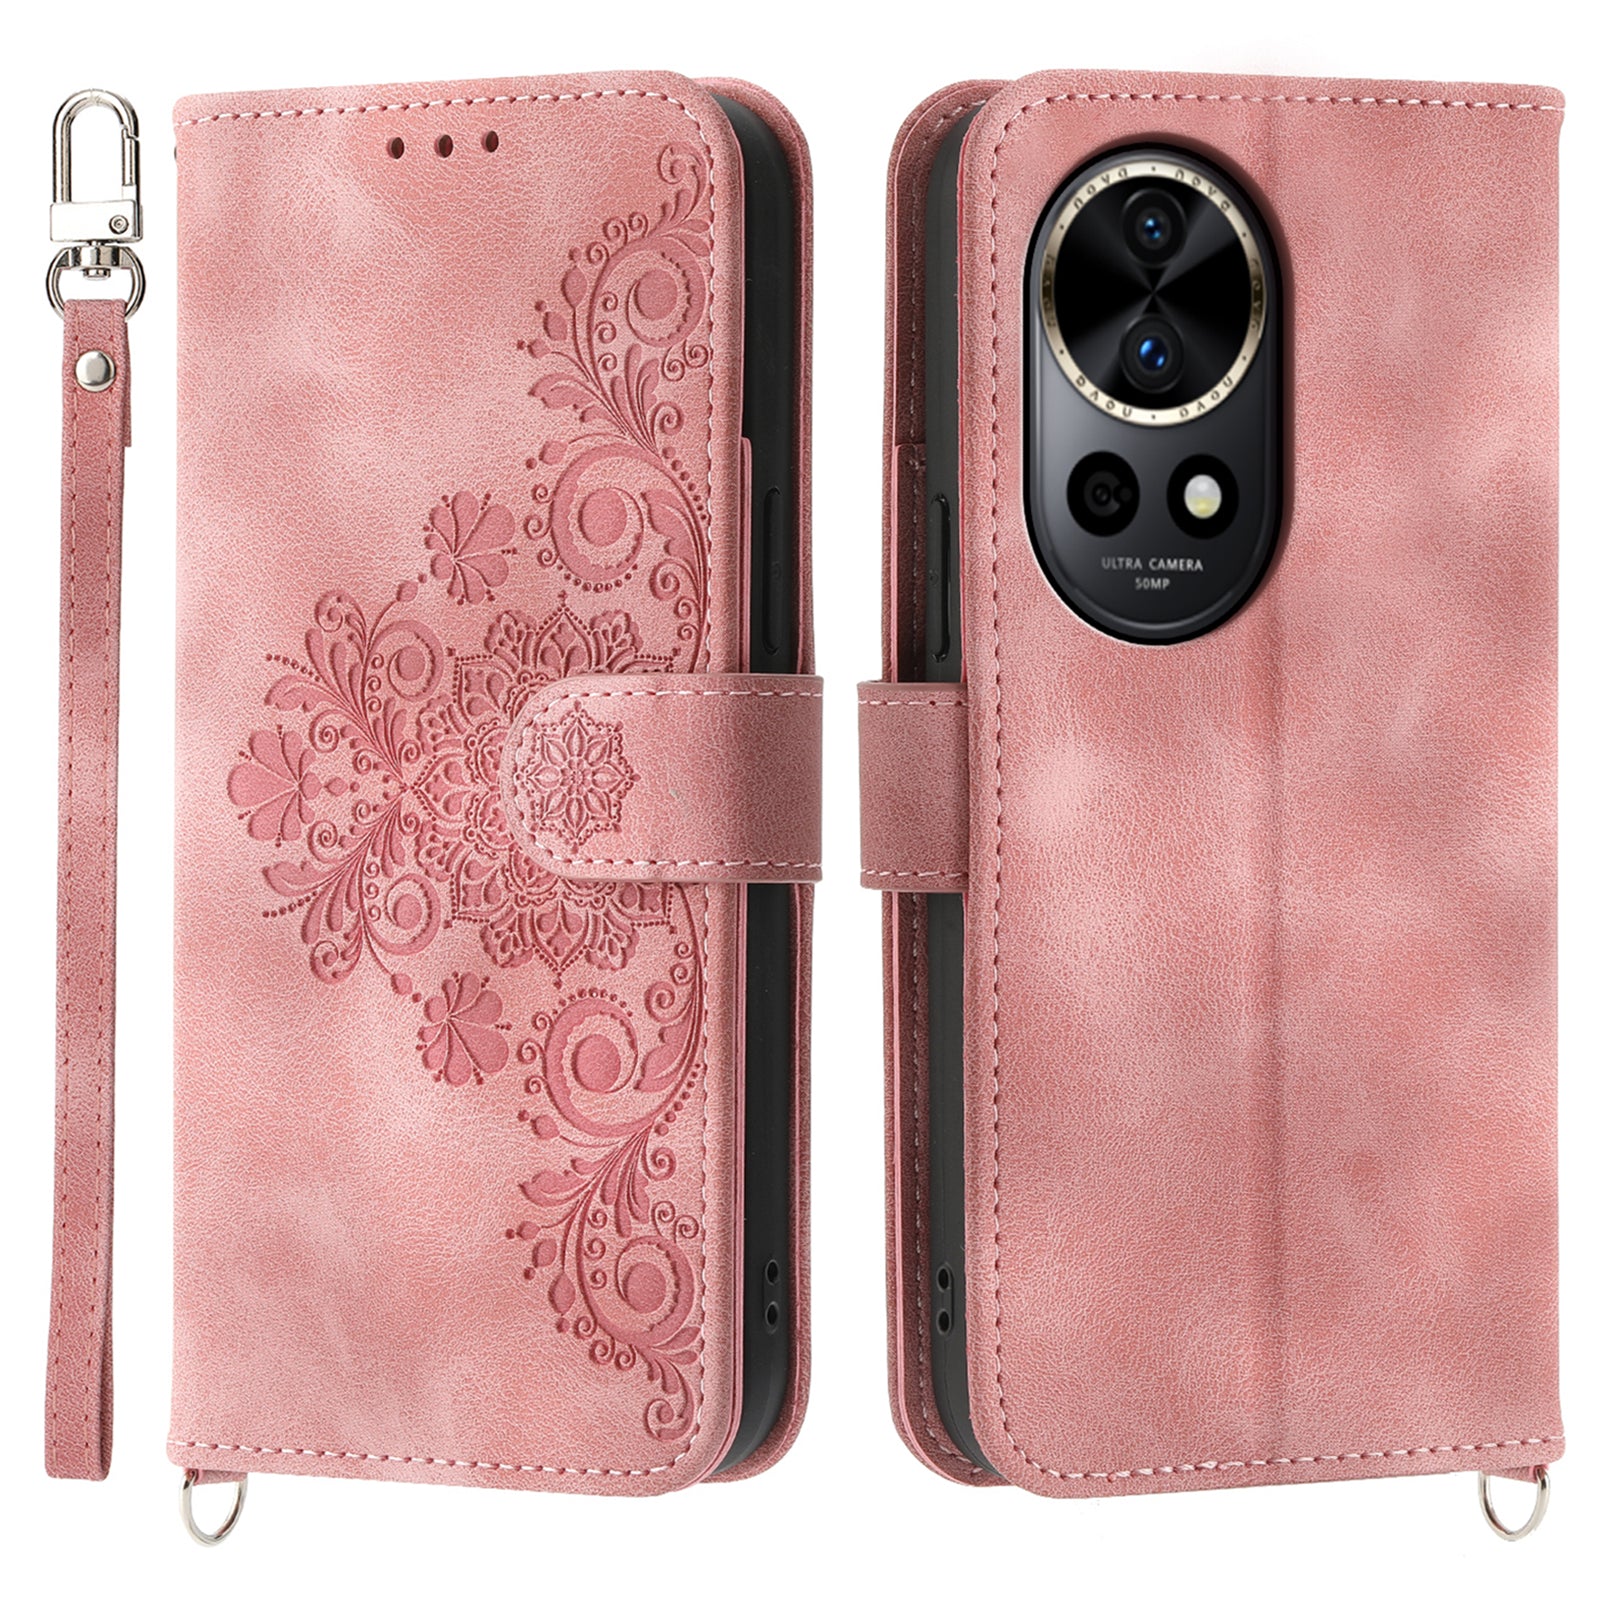 For Huawei nova 12 Pro 5G / nova 12 Ultra 5G Case Flower Wallet Leather Cover Mobile Accessories Wholesale Supplier - Pink